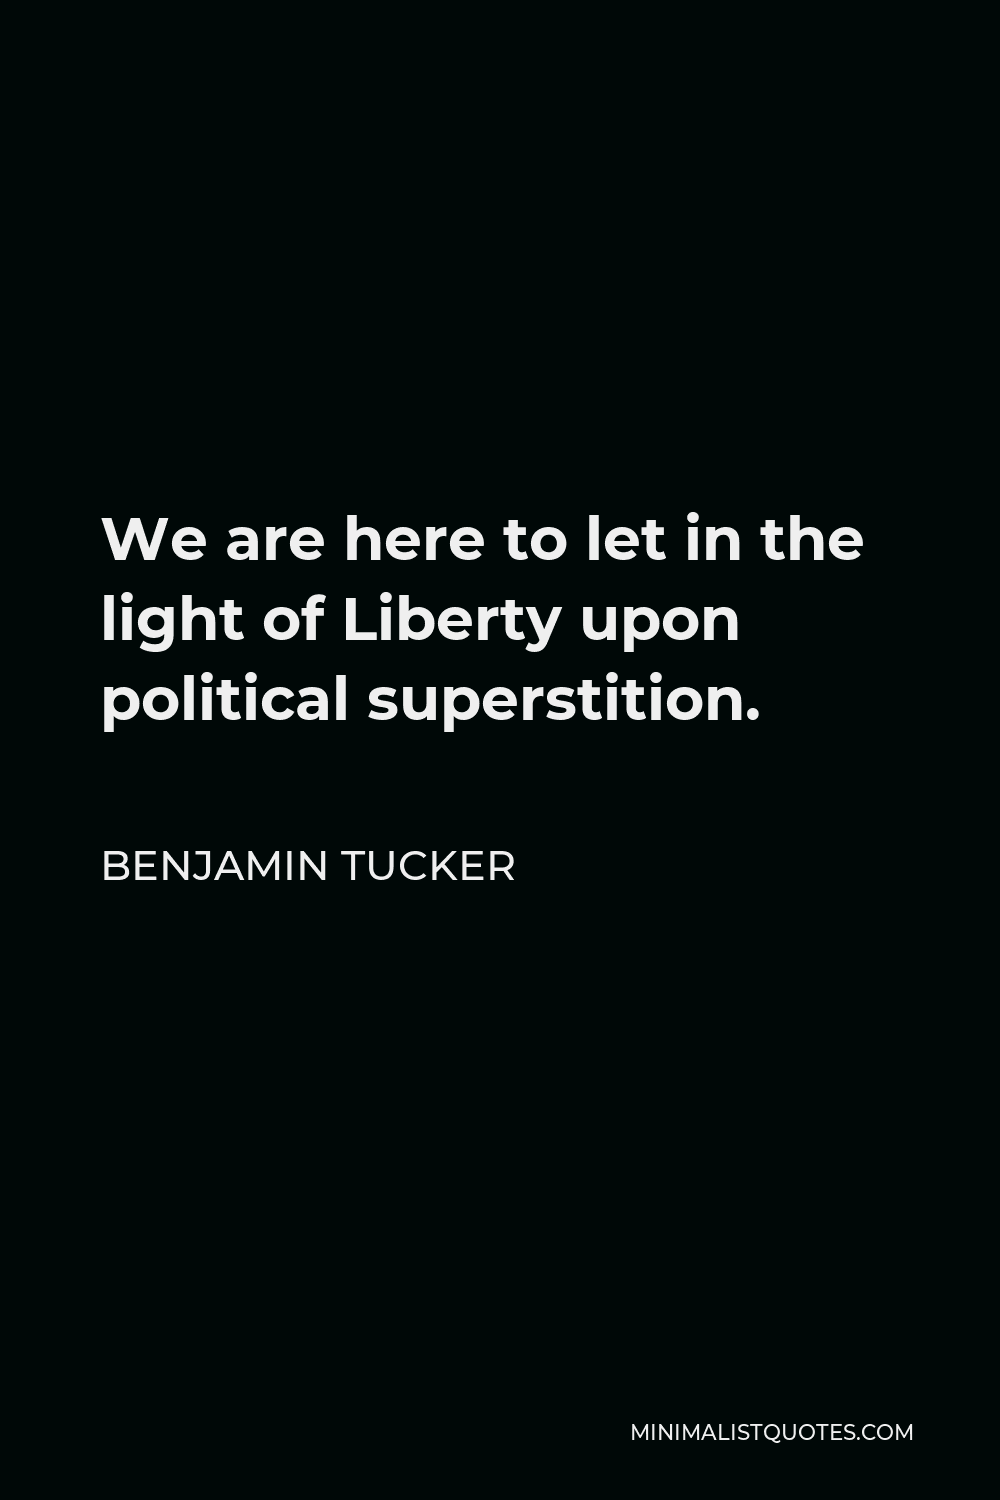 Benjamin Tucker Quote - We are here to let in the light of Liberty upon political superstition.